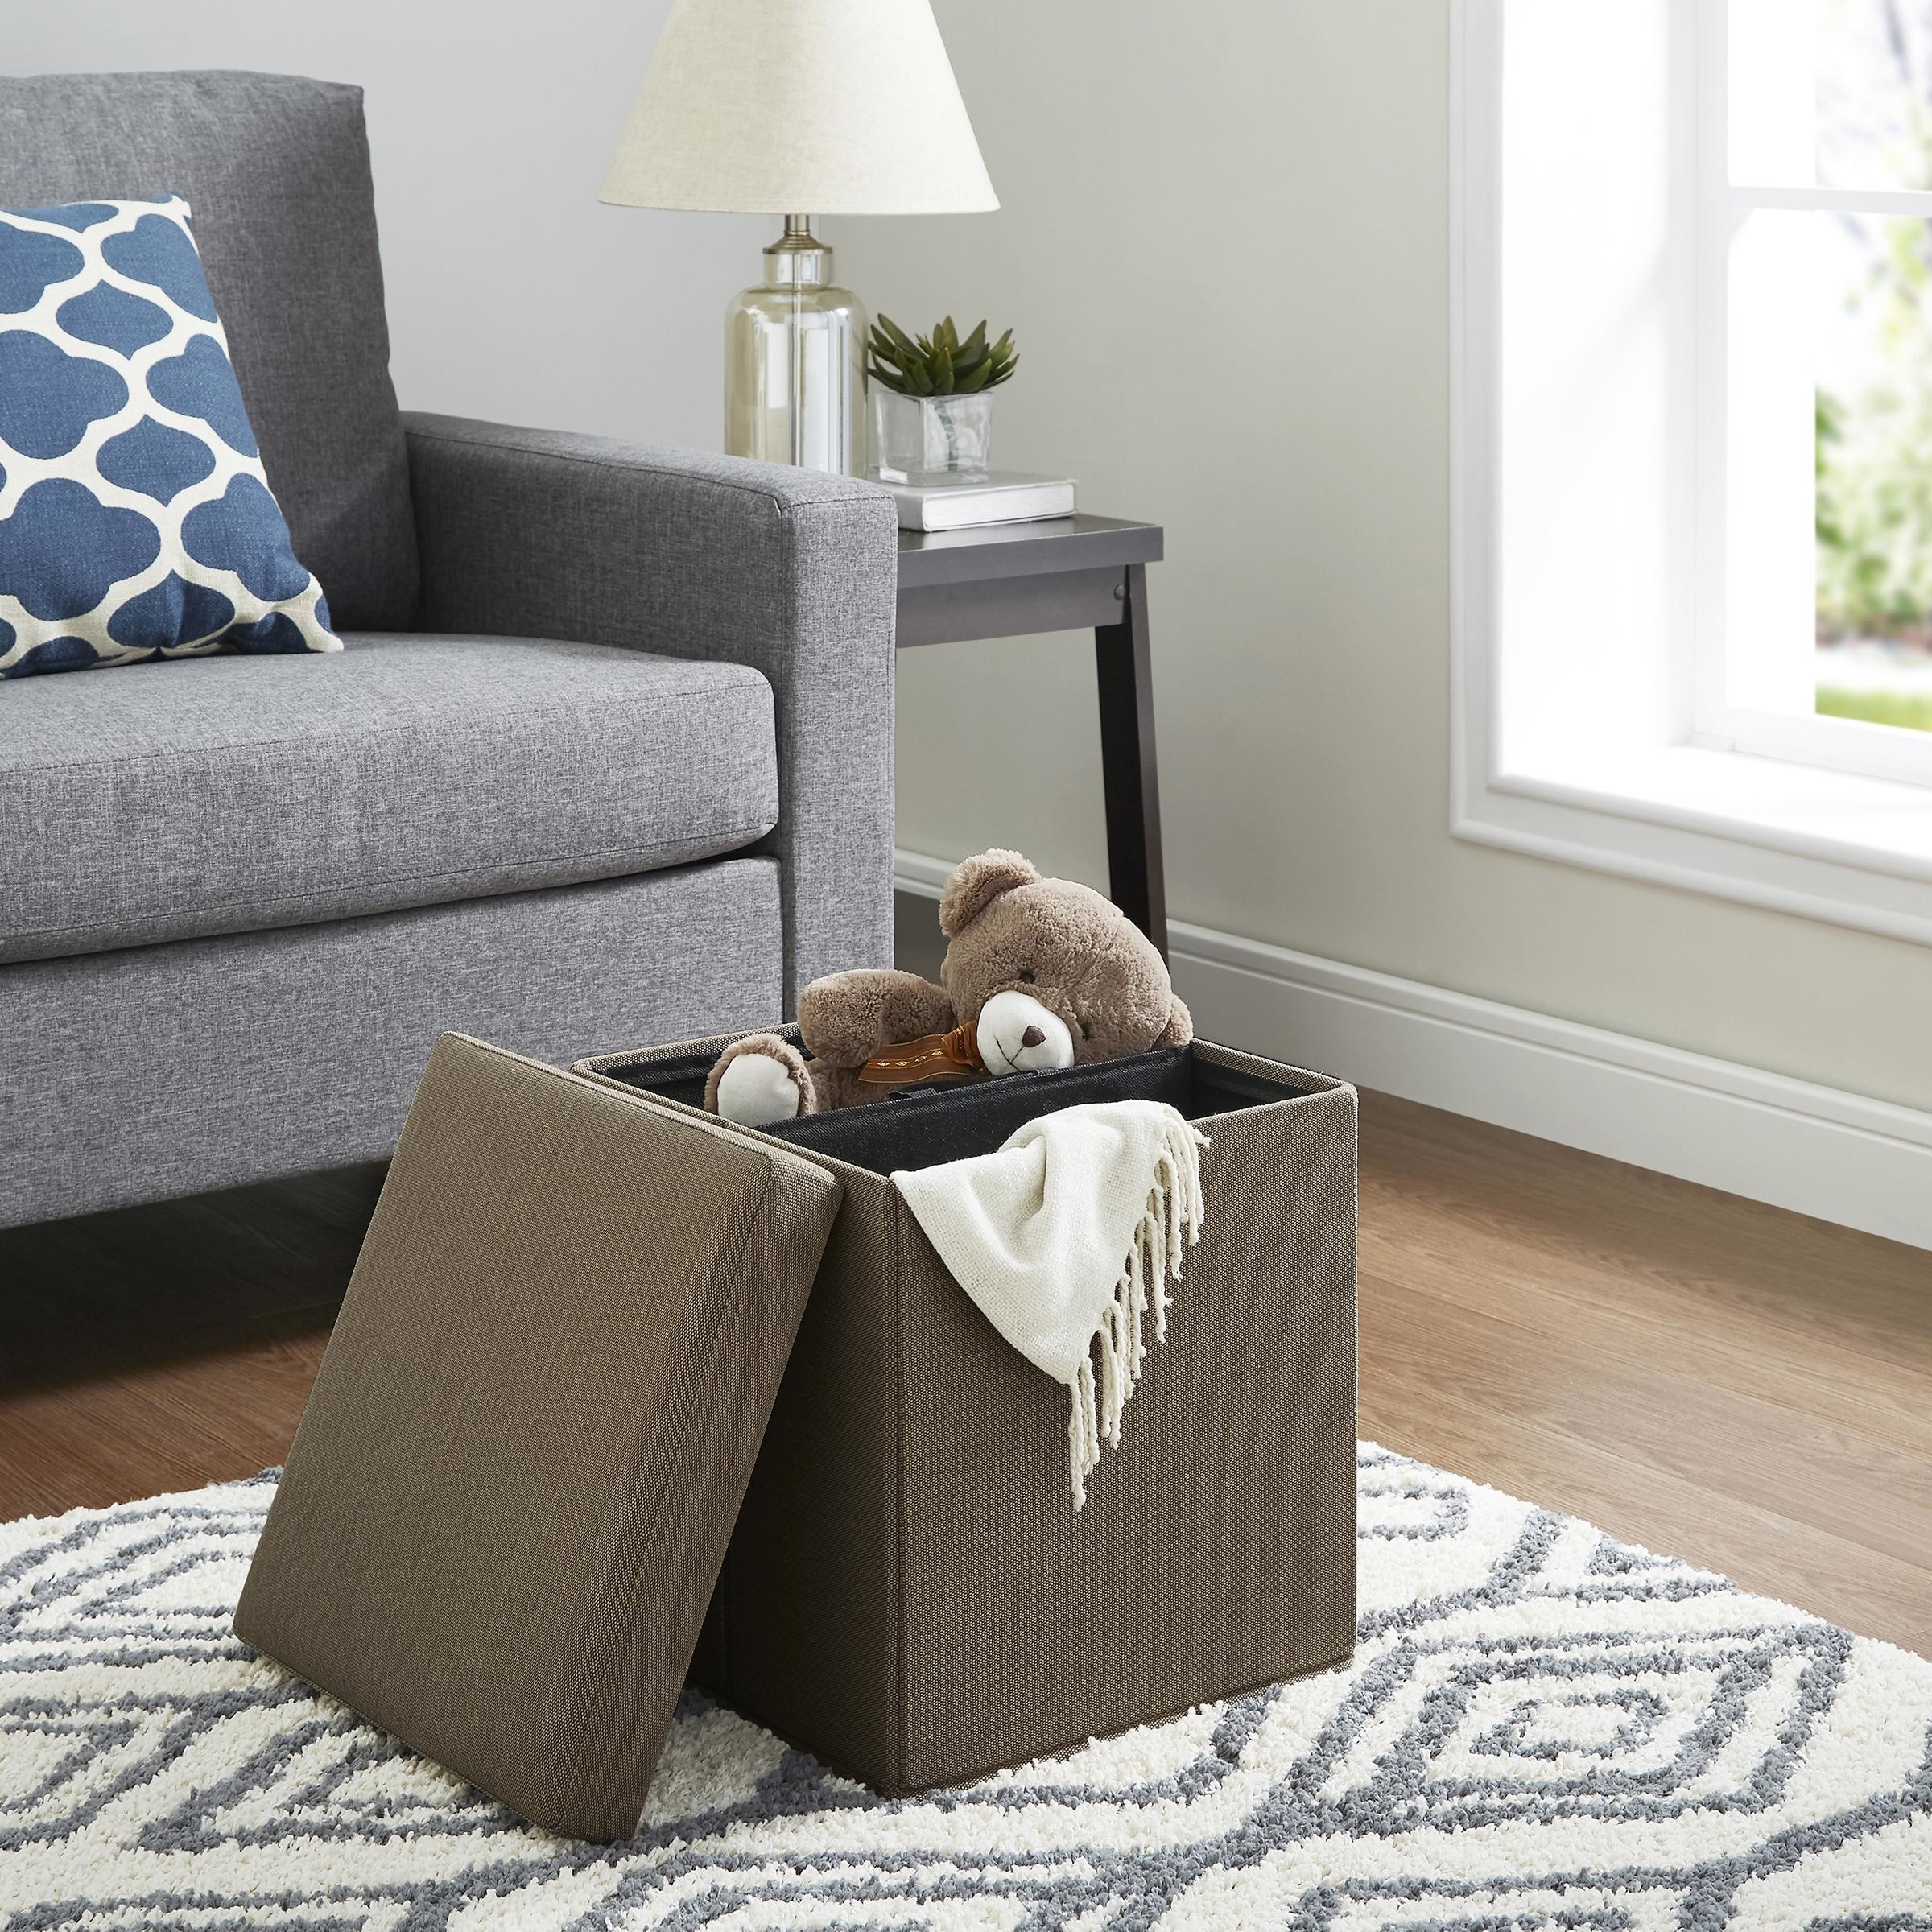 Brown square storage  unit in living room with teddy bear